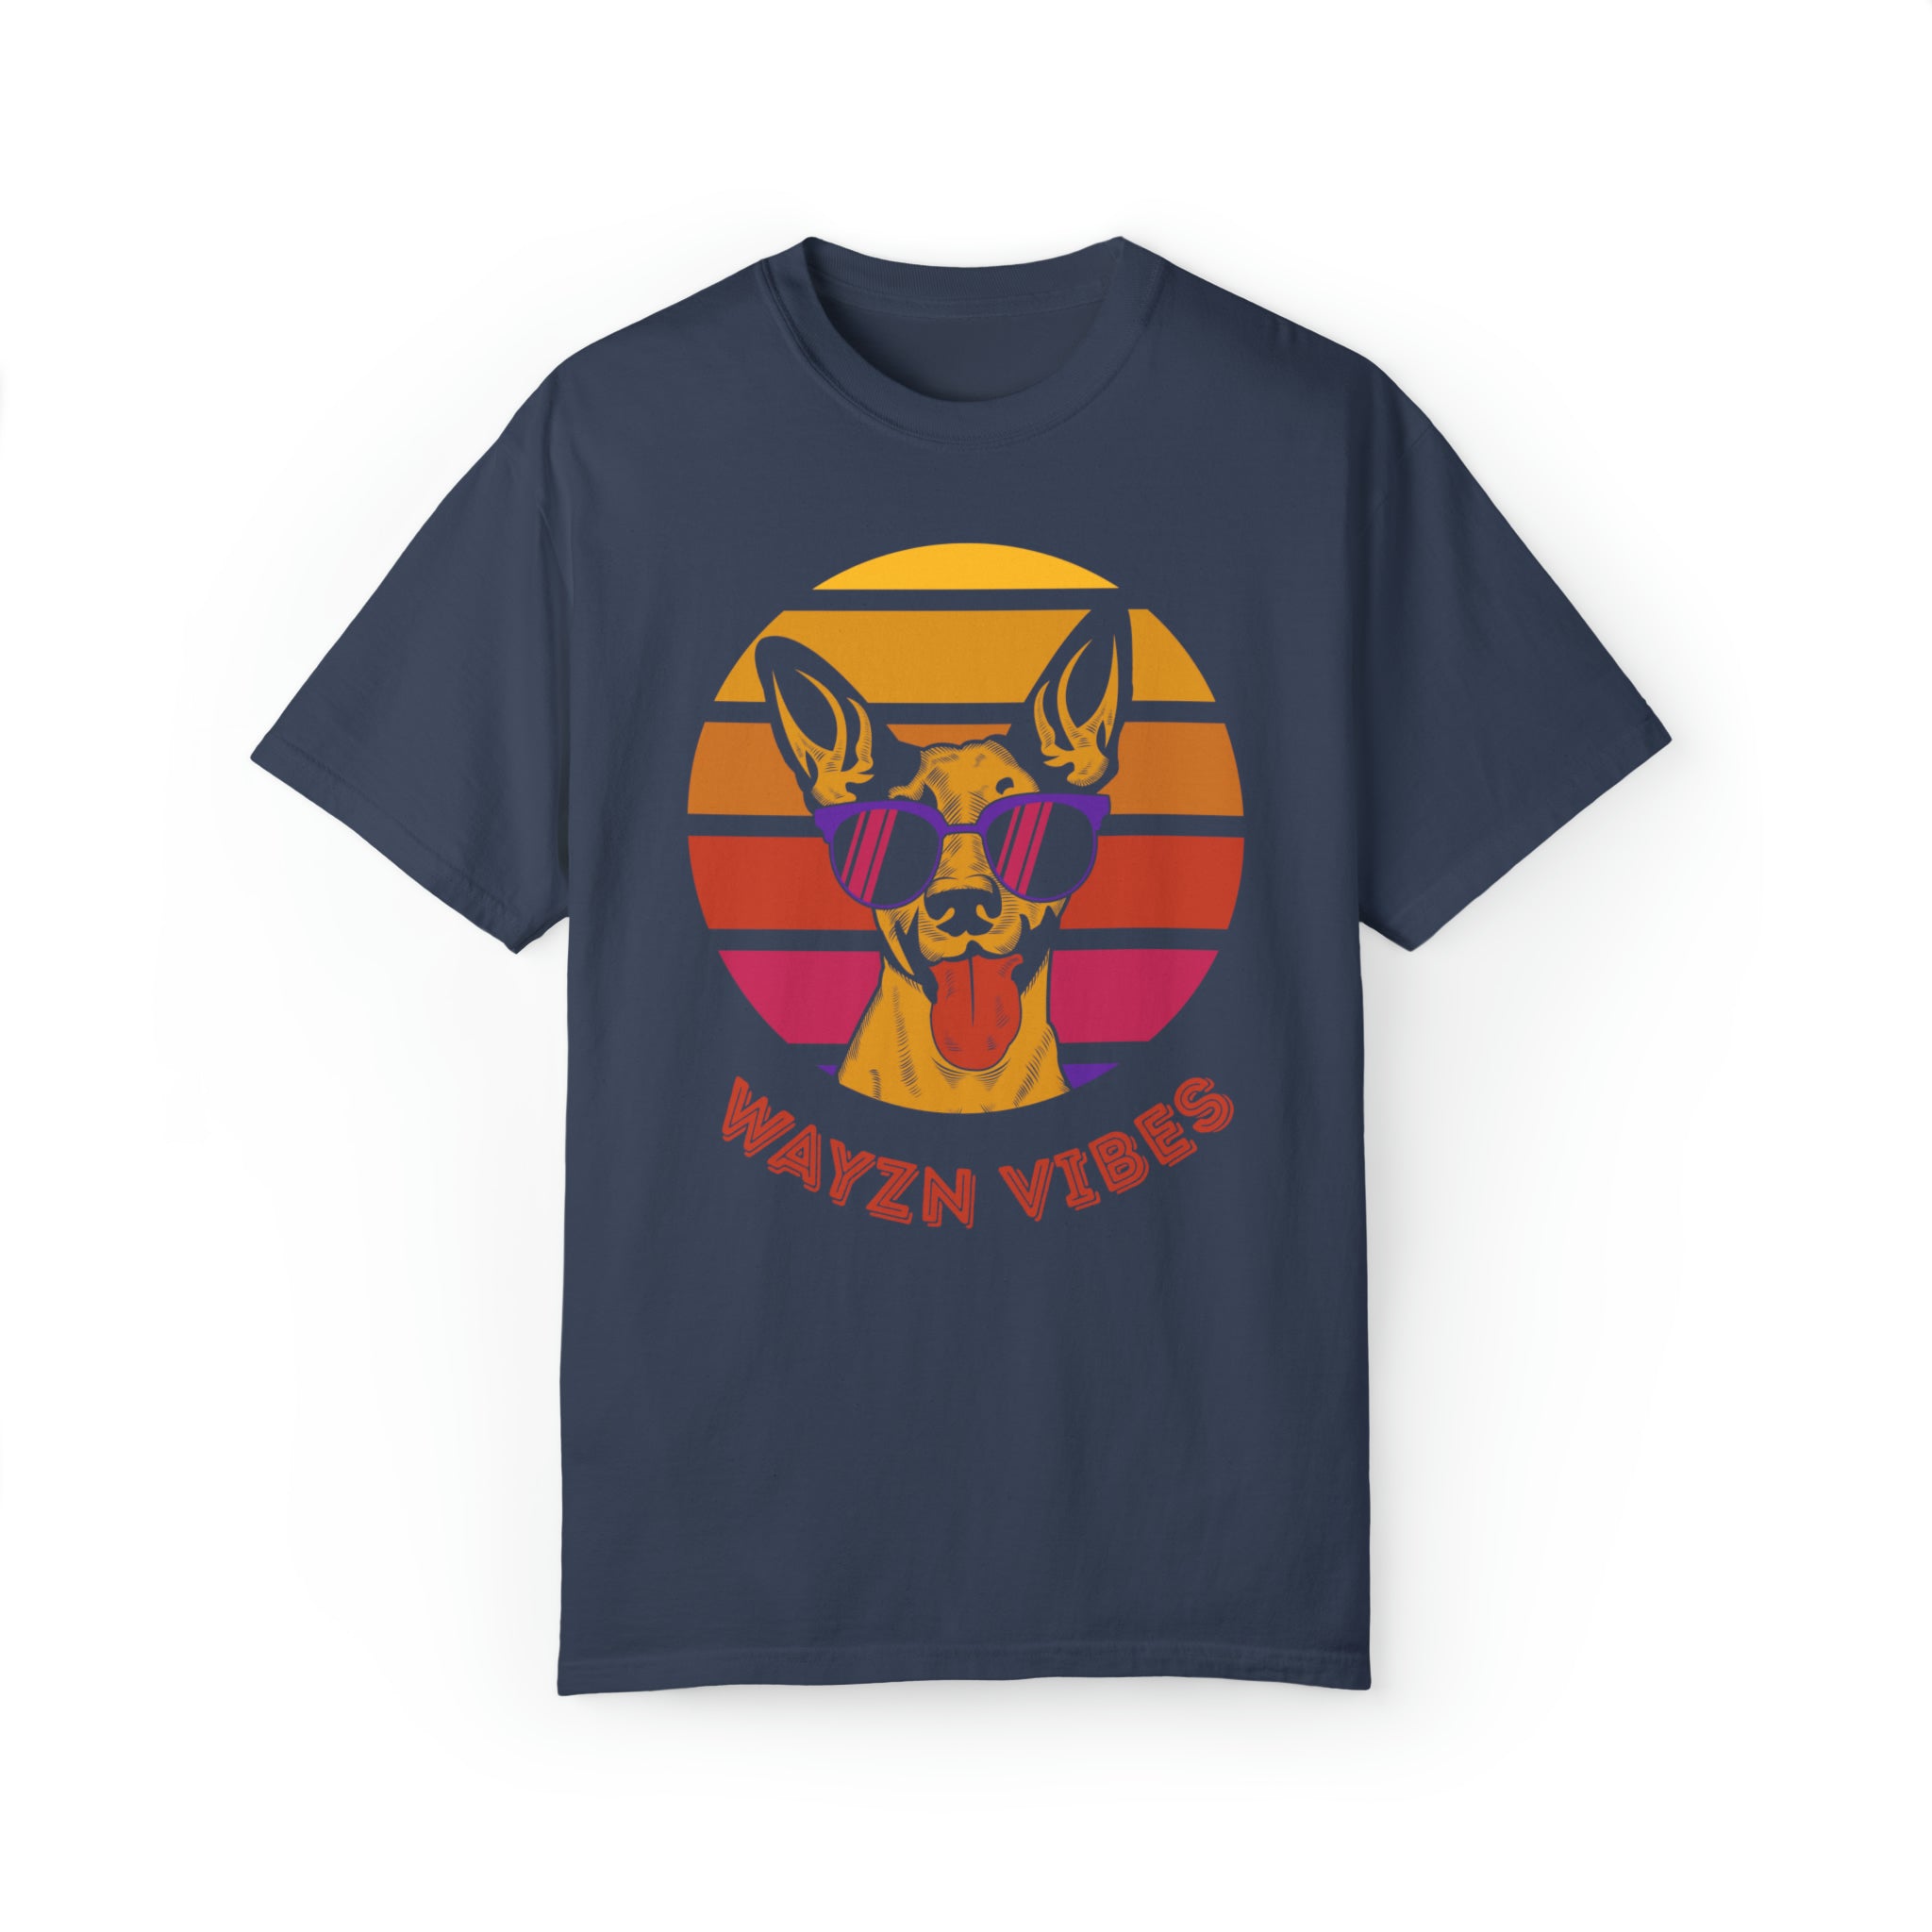 Wayzn Vibes - Unisex Dyed T-shirt: A dog wearing sunglasses and sticking out its tongue on a blue shirt.